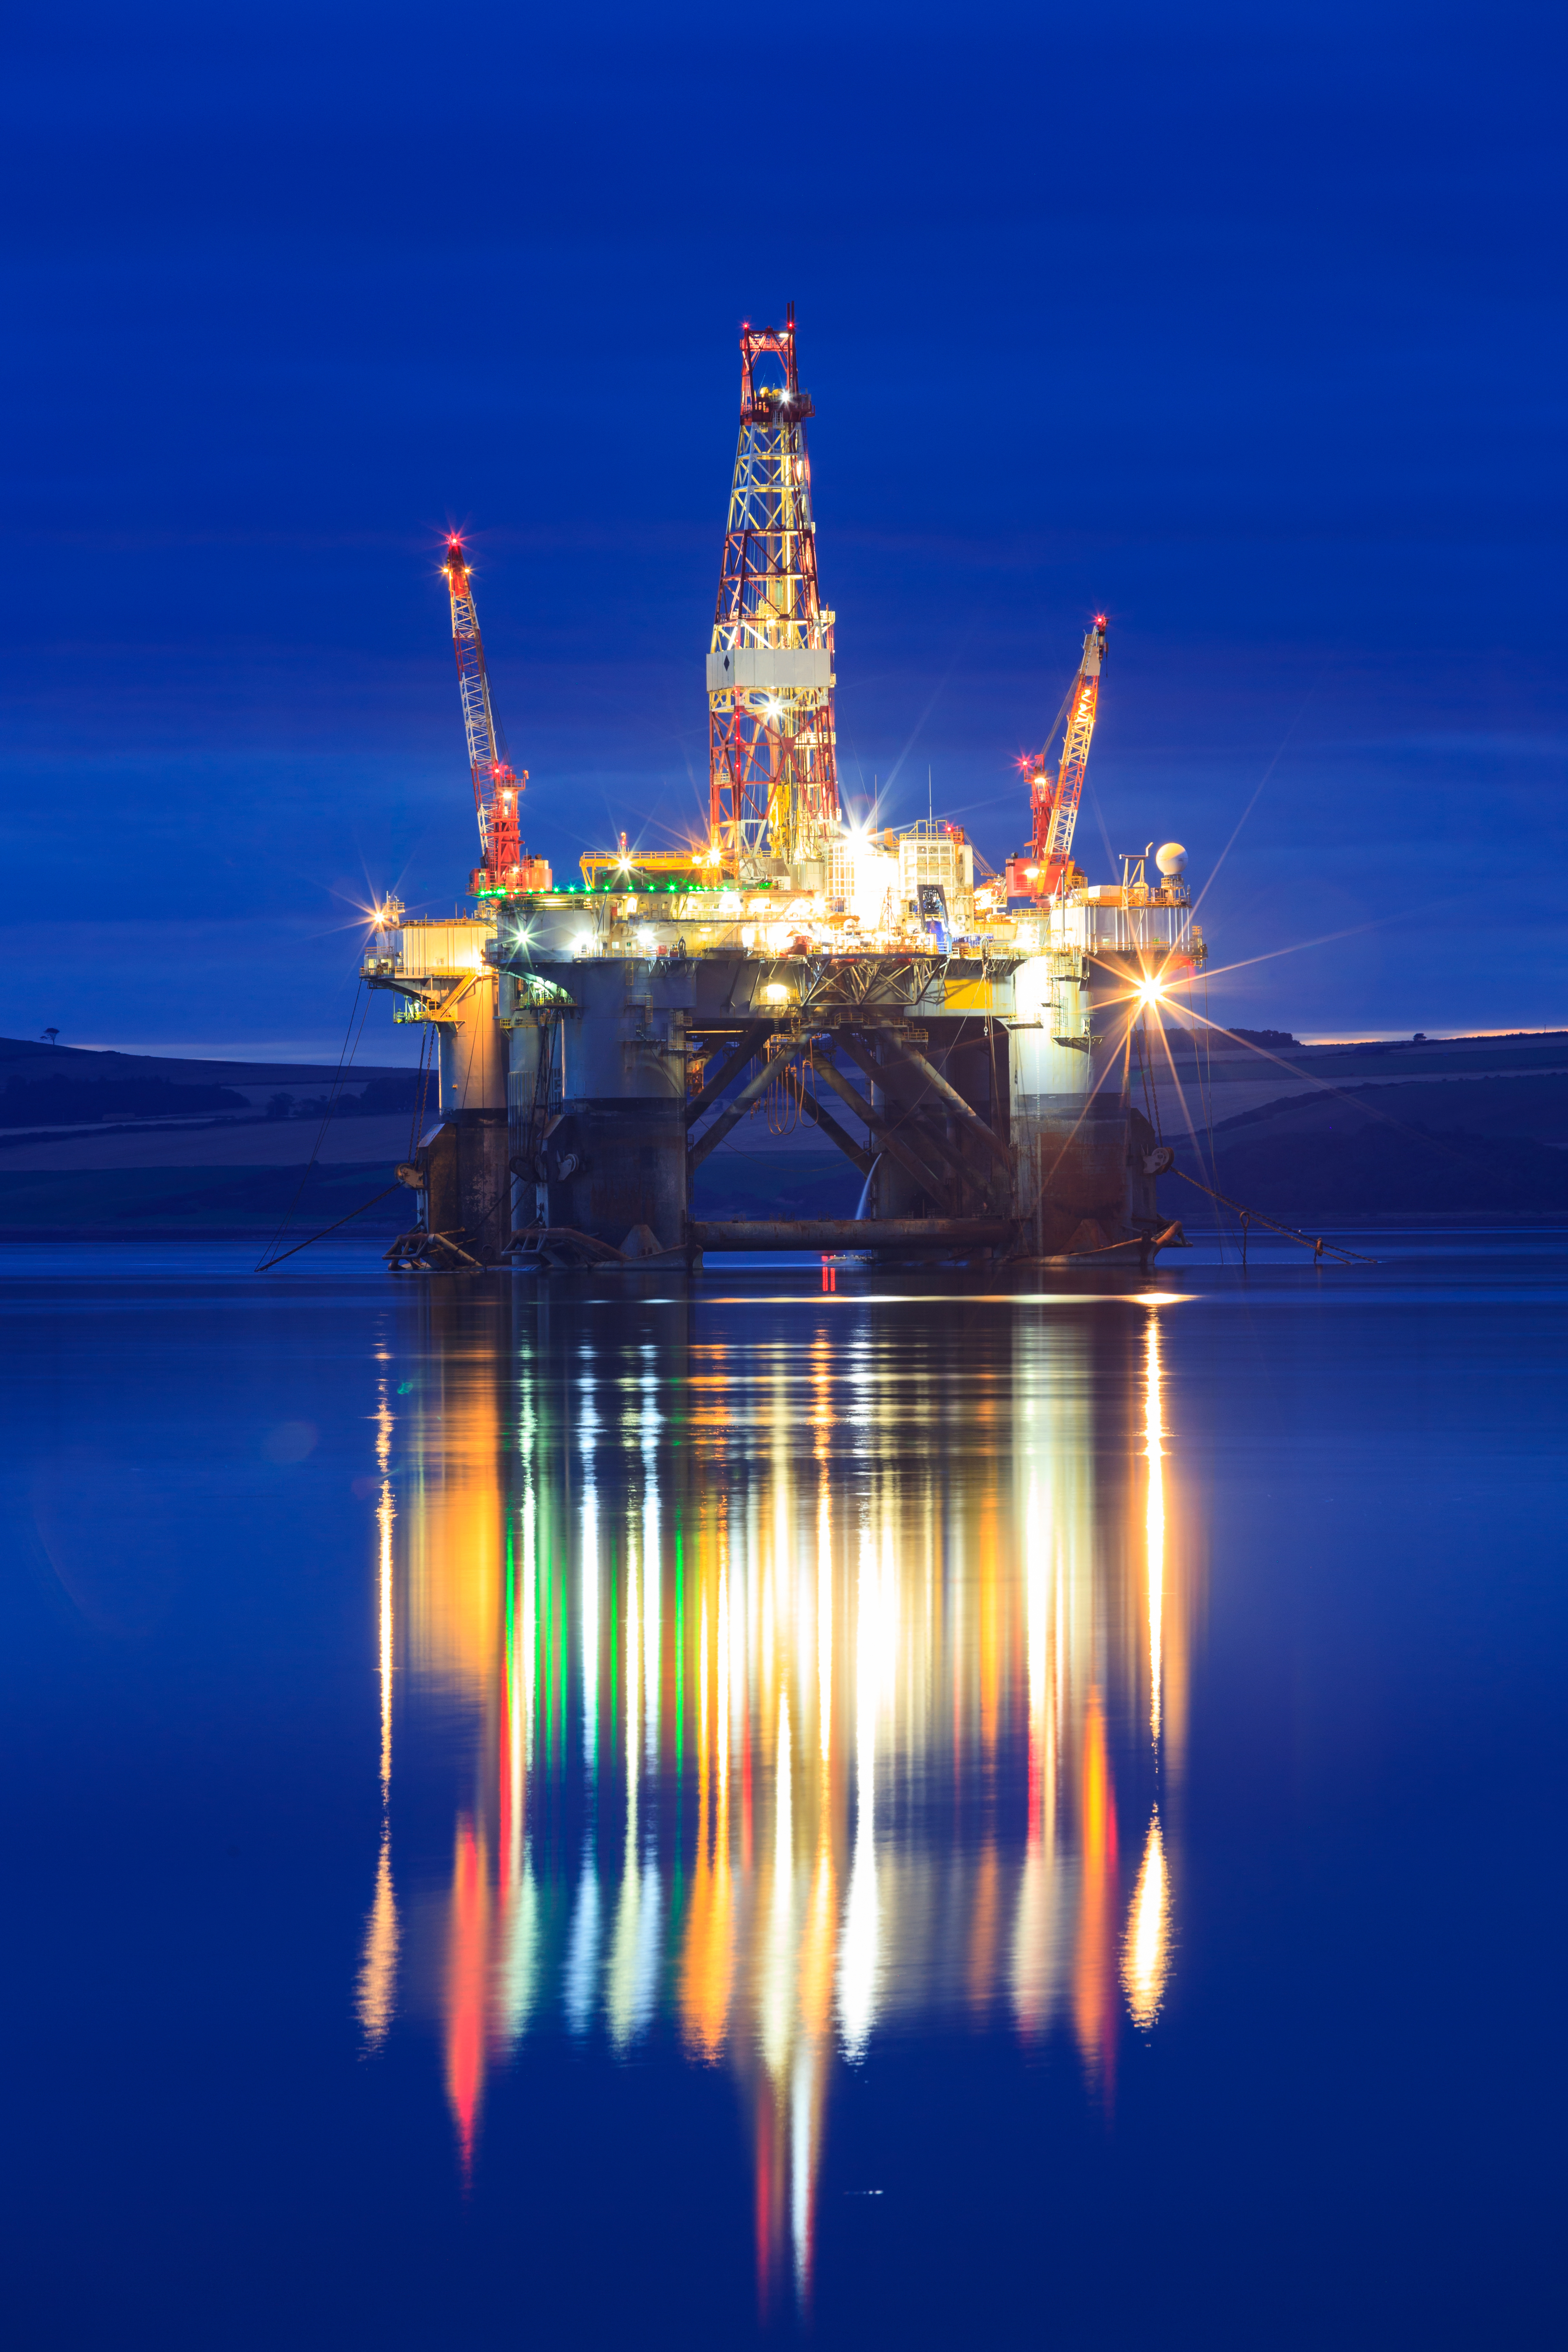 Oil and gas platform at night